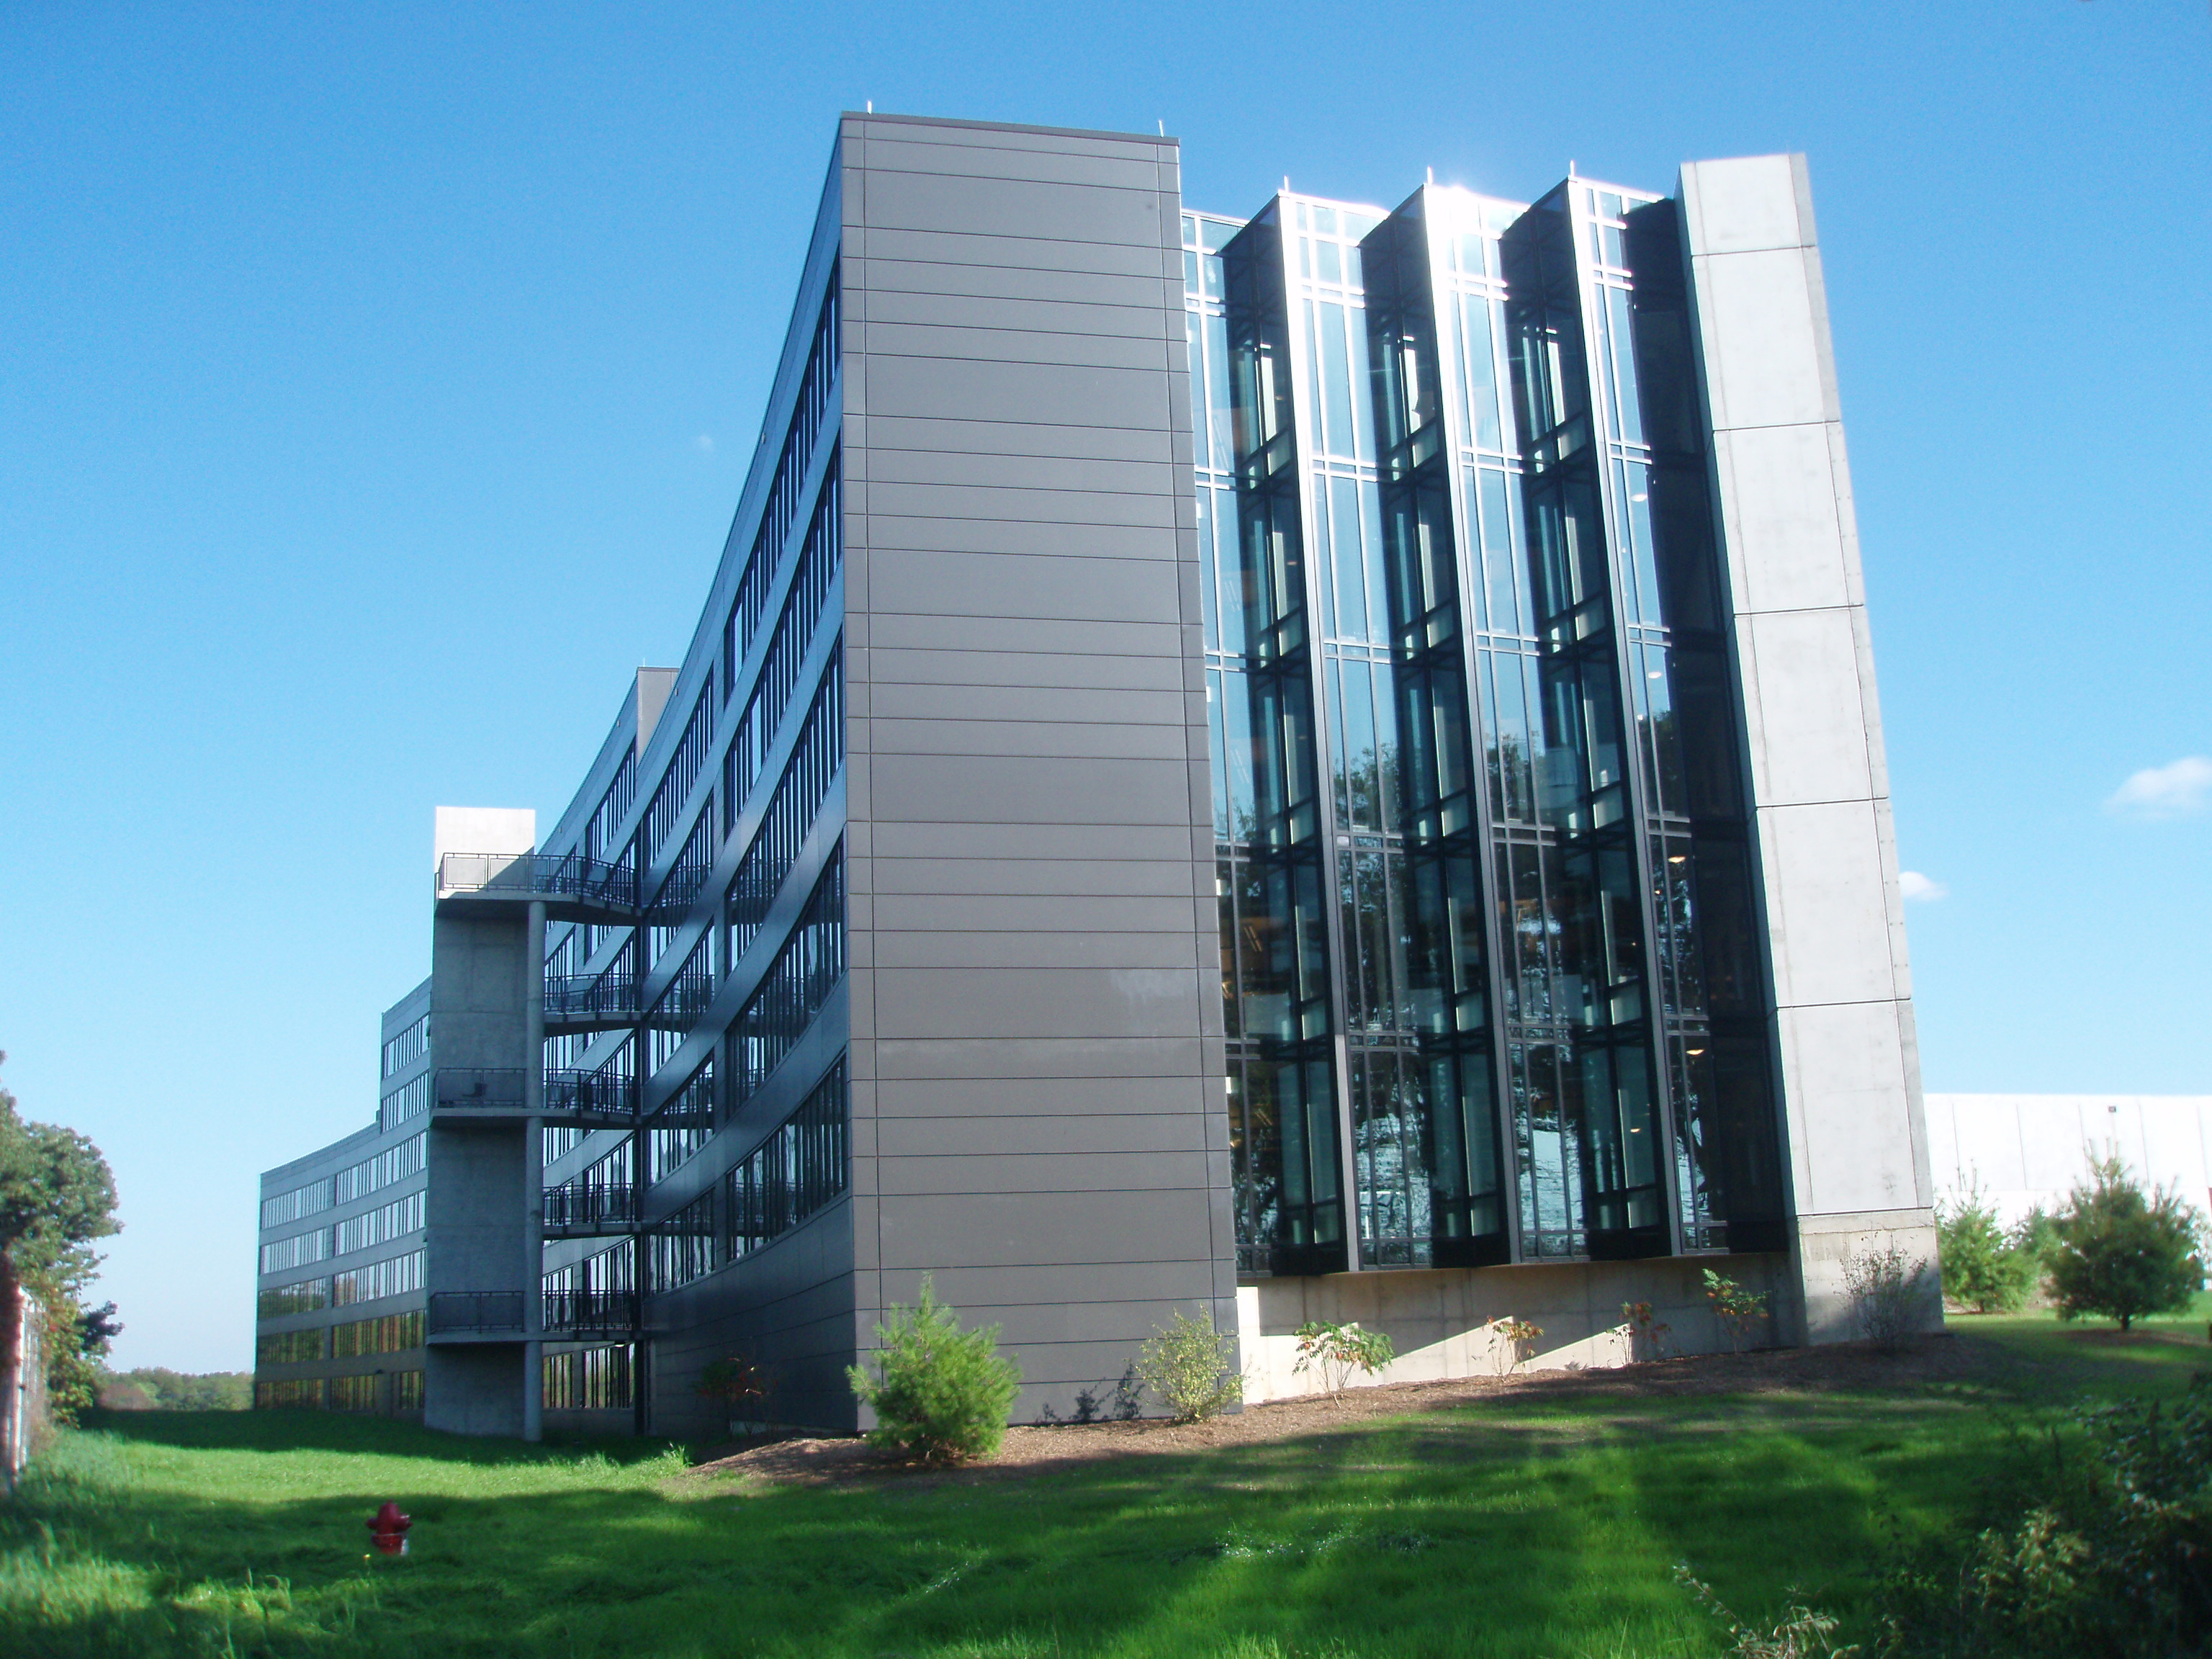 Argonne Theory & Computer Sciences Building